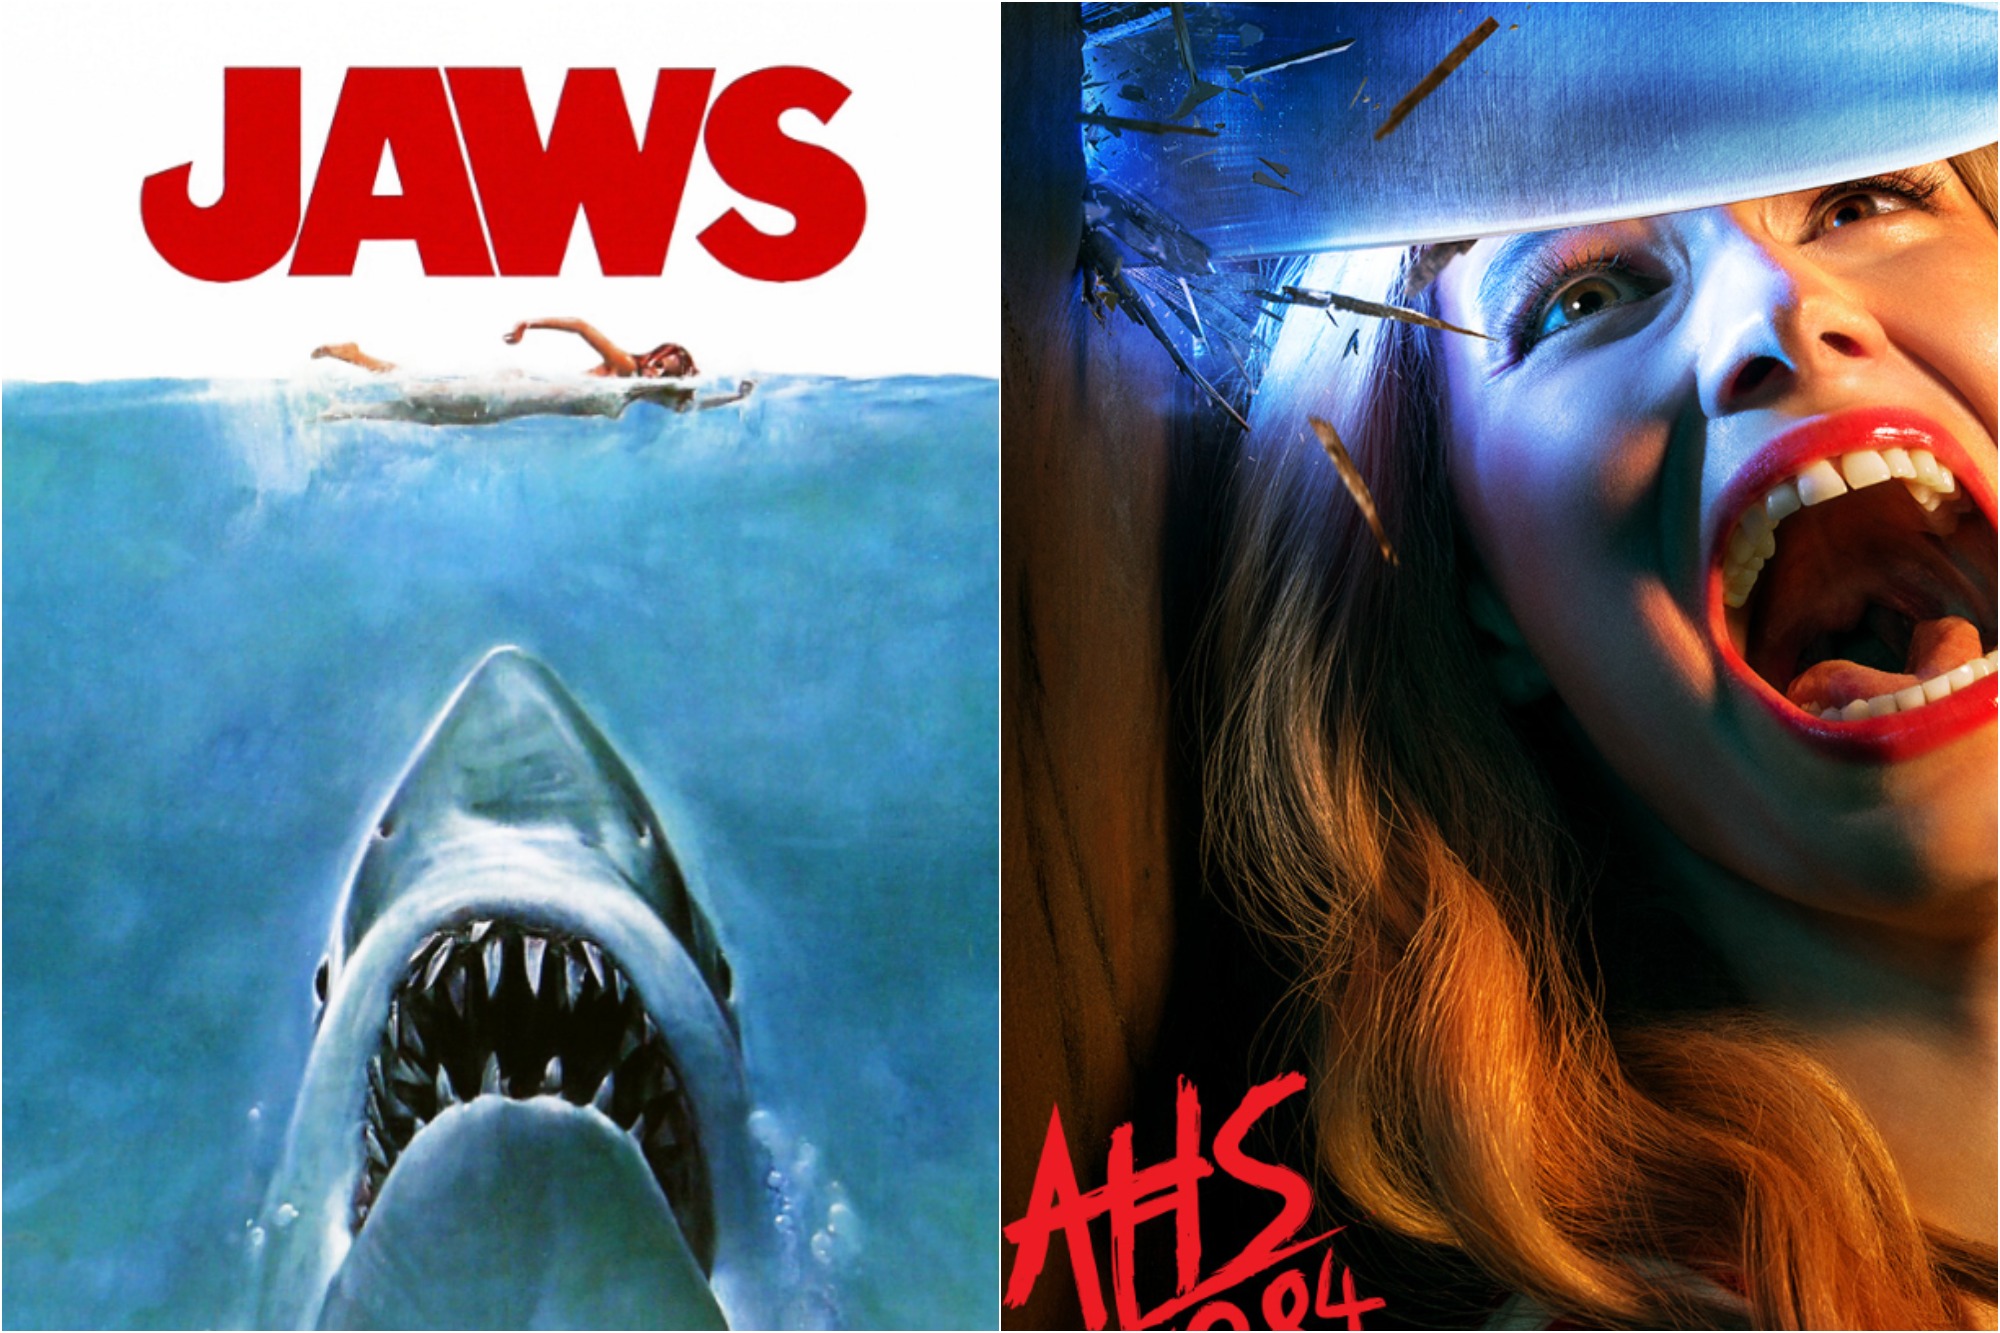 Poster for 'Jaws,' a 1975 American Thriller film directed by Steven Spielberg / Poster for Season 9 of 'American Horror Story: 1984.'